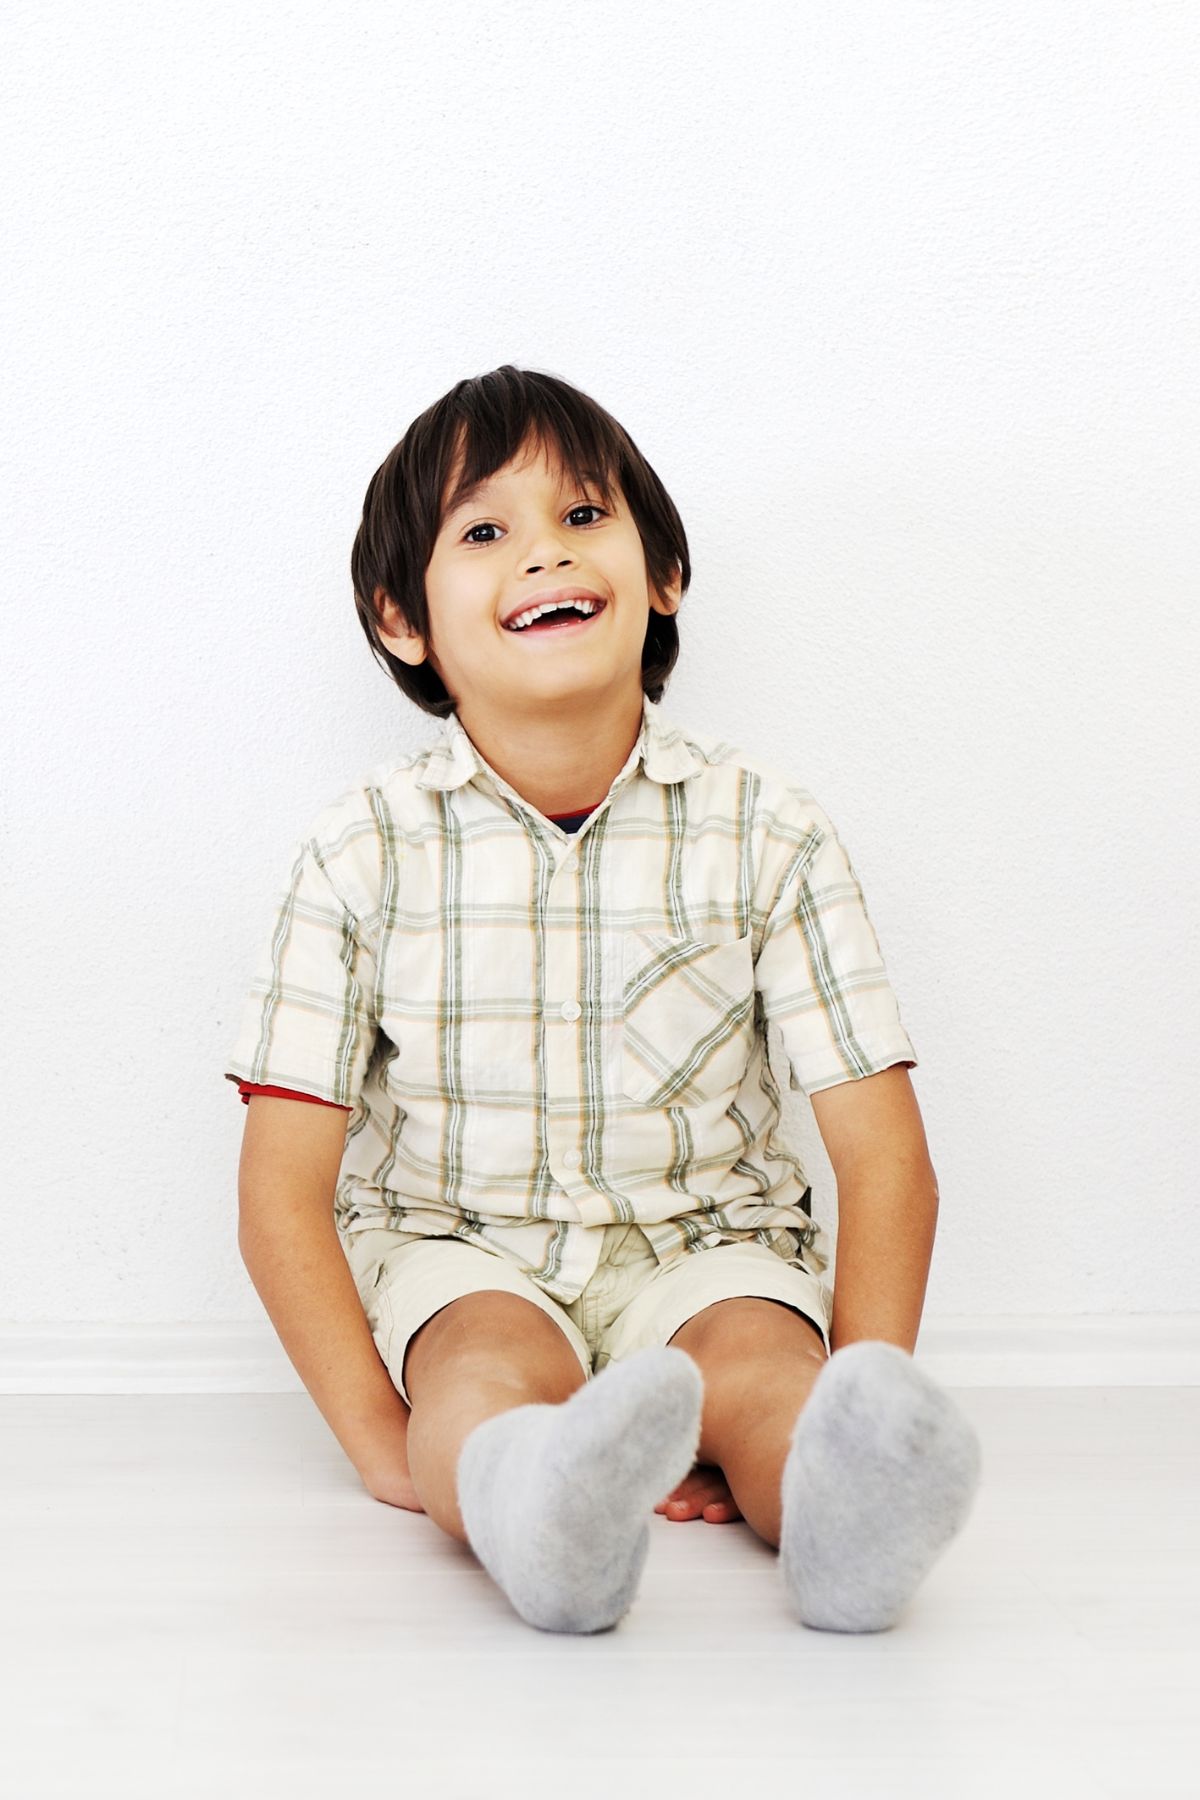 Smiling boy in a plaid shirt sits on the floor with his back to the wall.